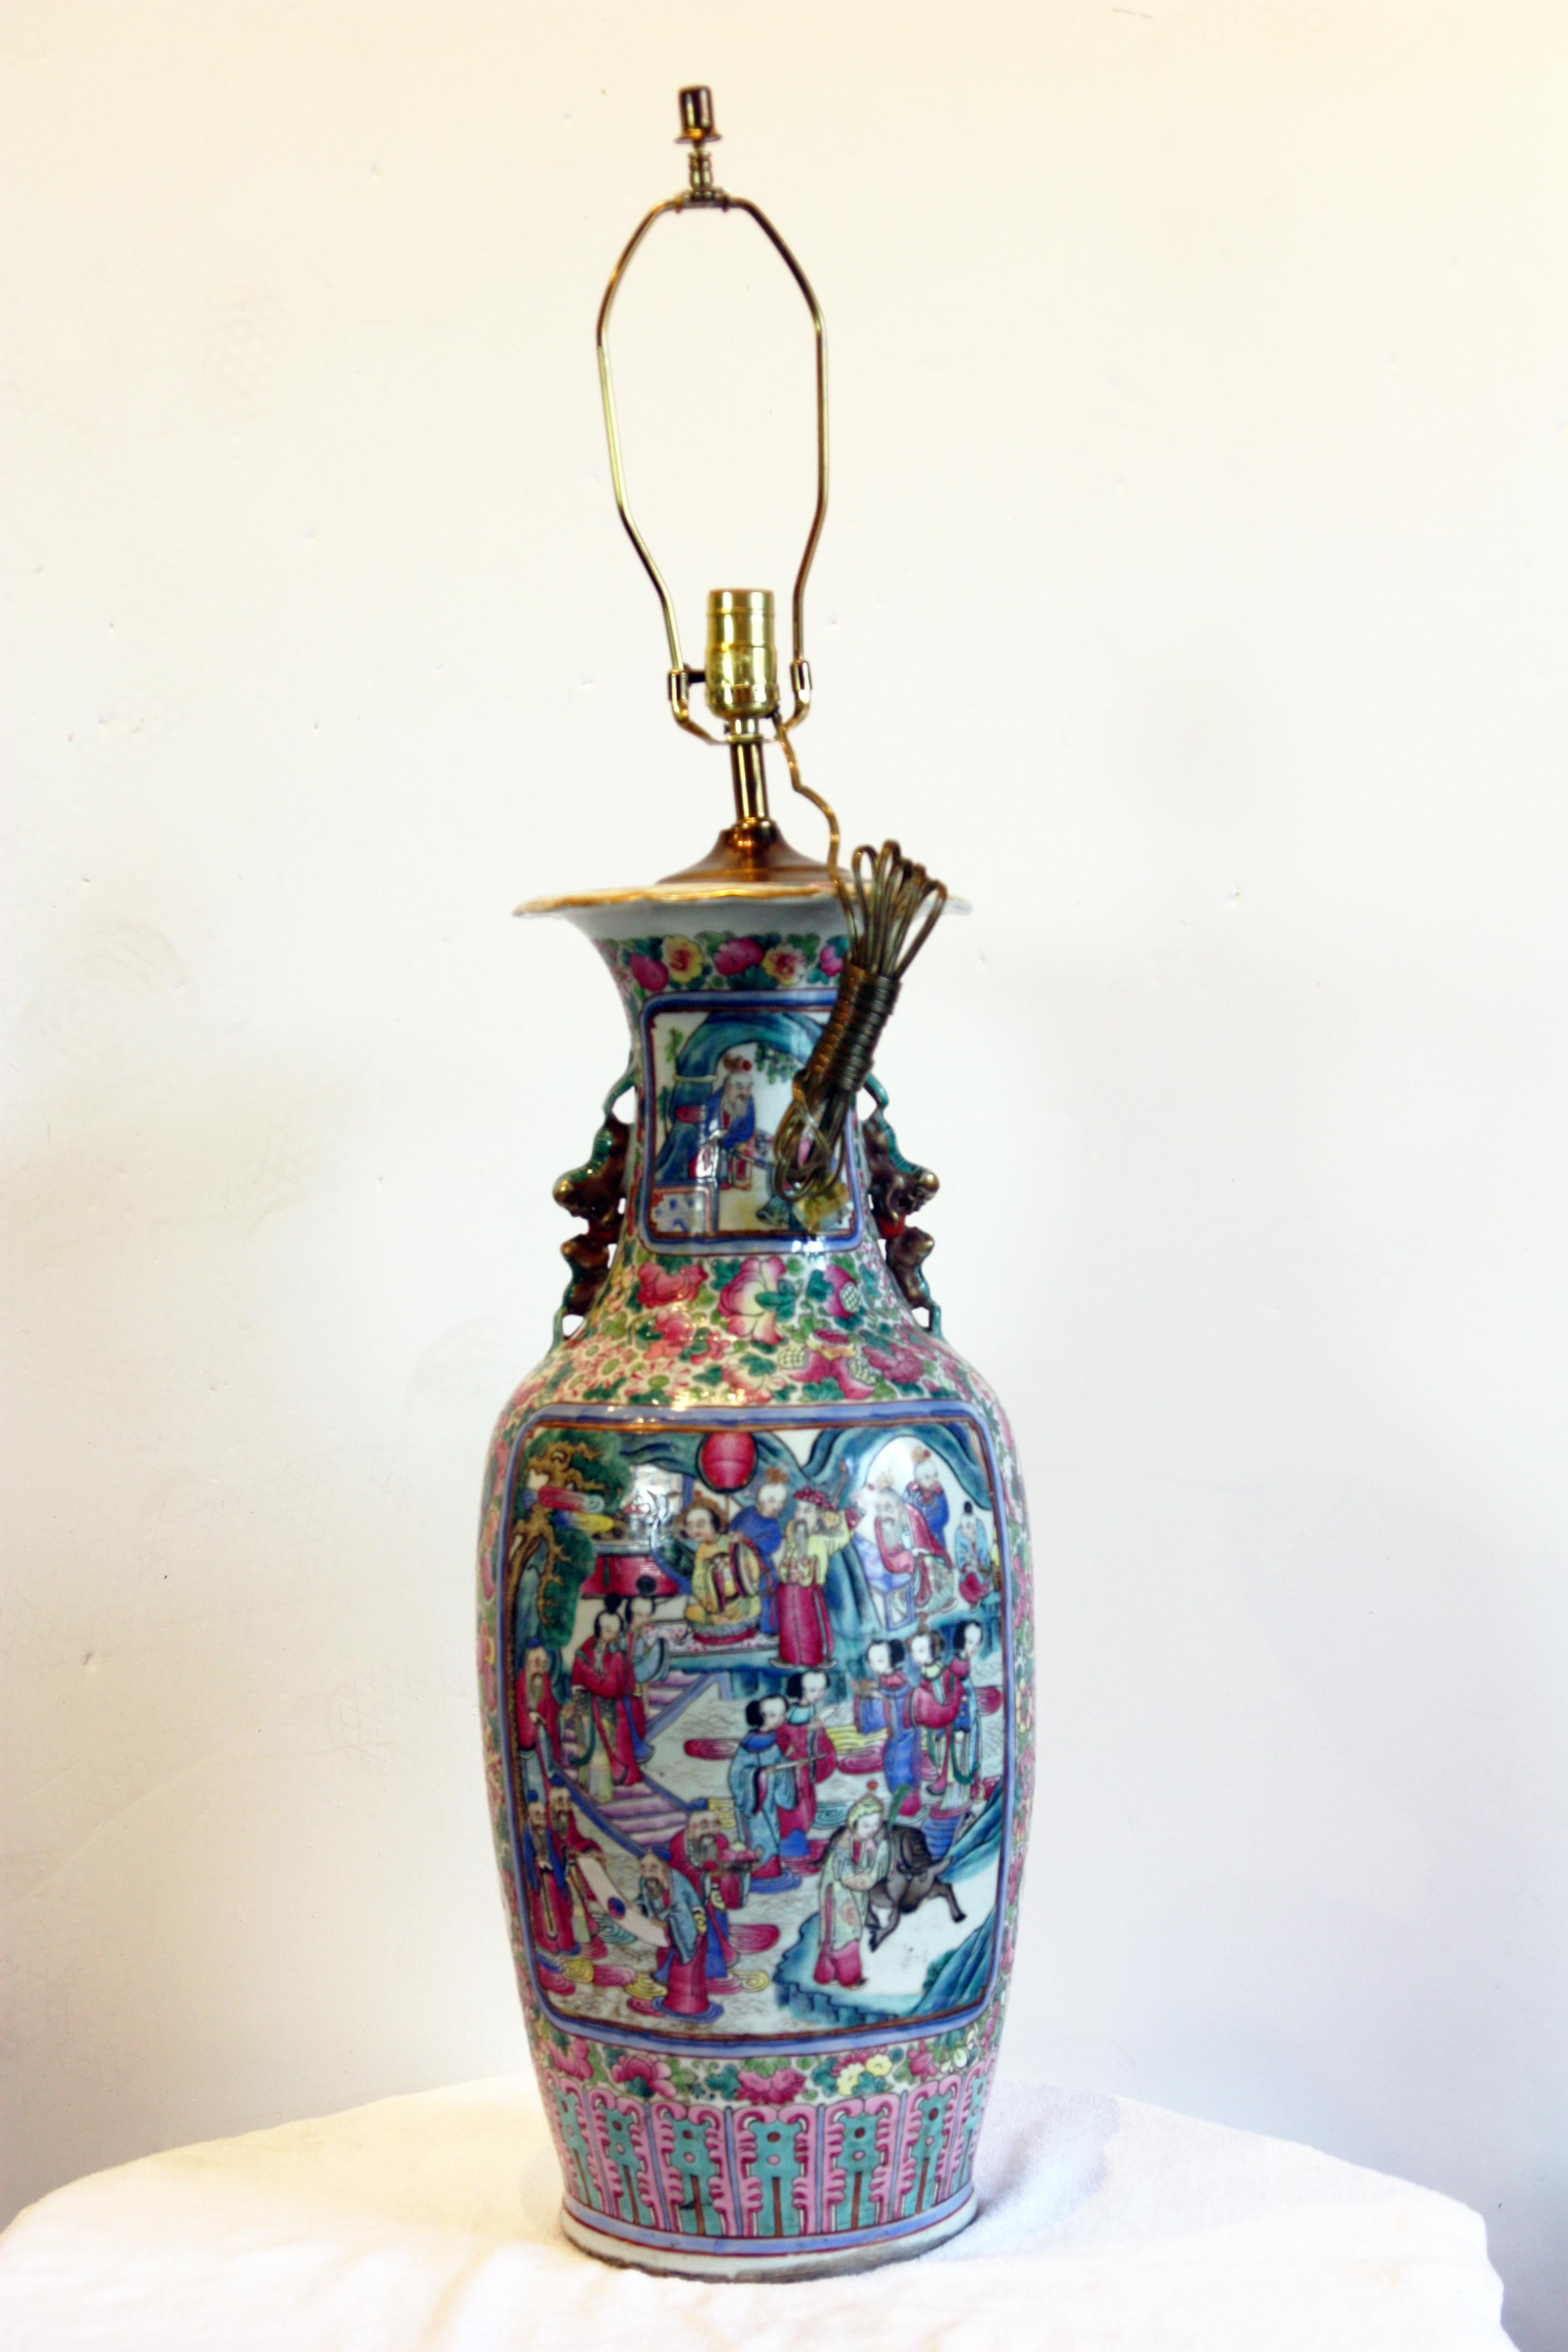 Large, beautifully hand-painted vase lamp. Royal scenes, foo dogs, gardens and flowers adorn the piece. Cat handles on the neck of the vase. Shade not included.